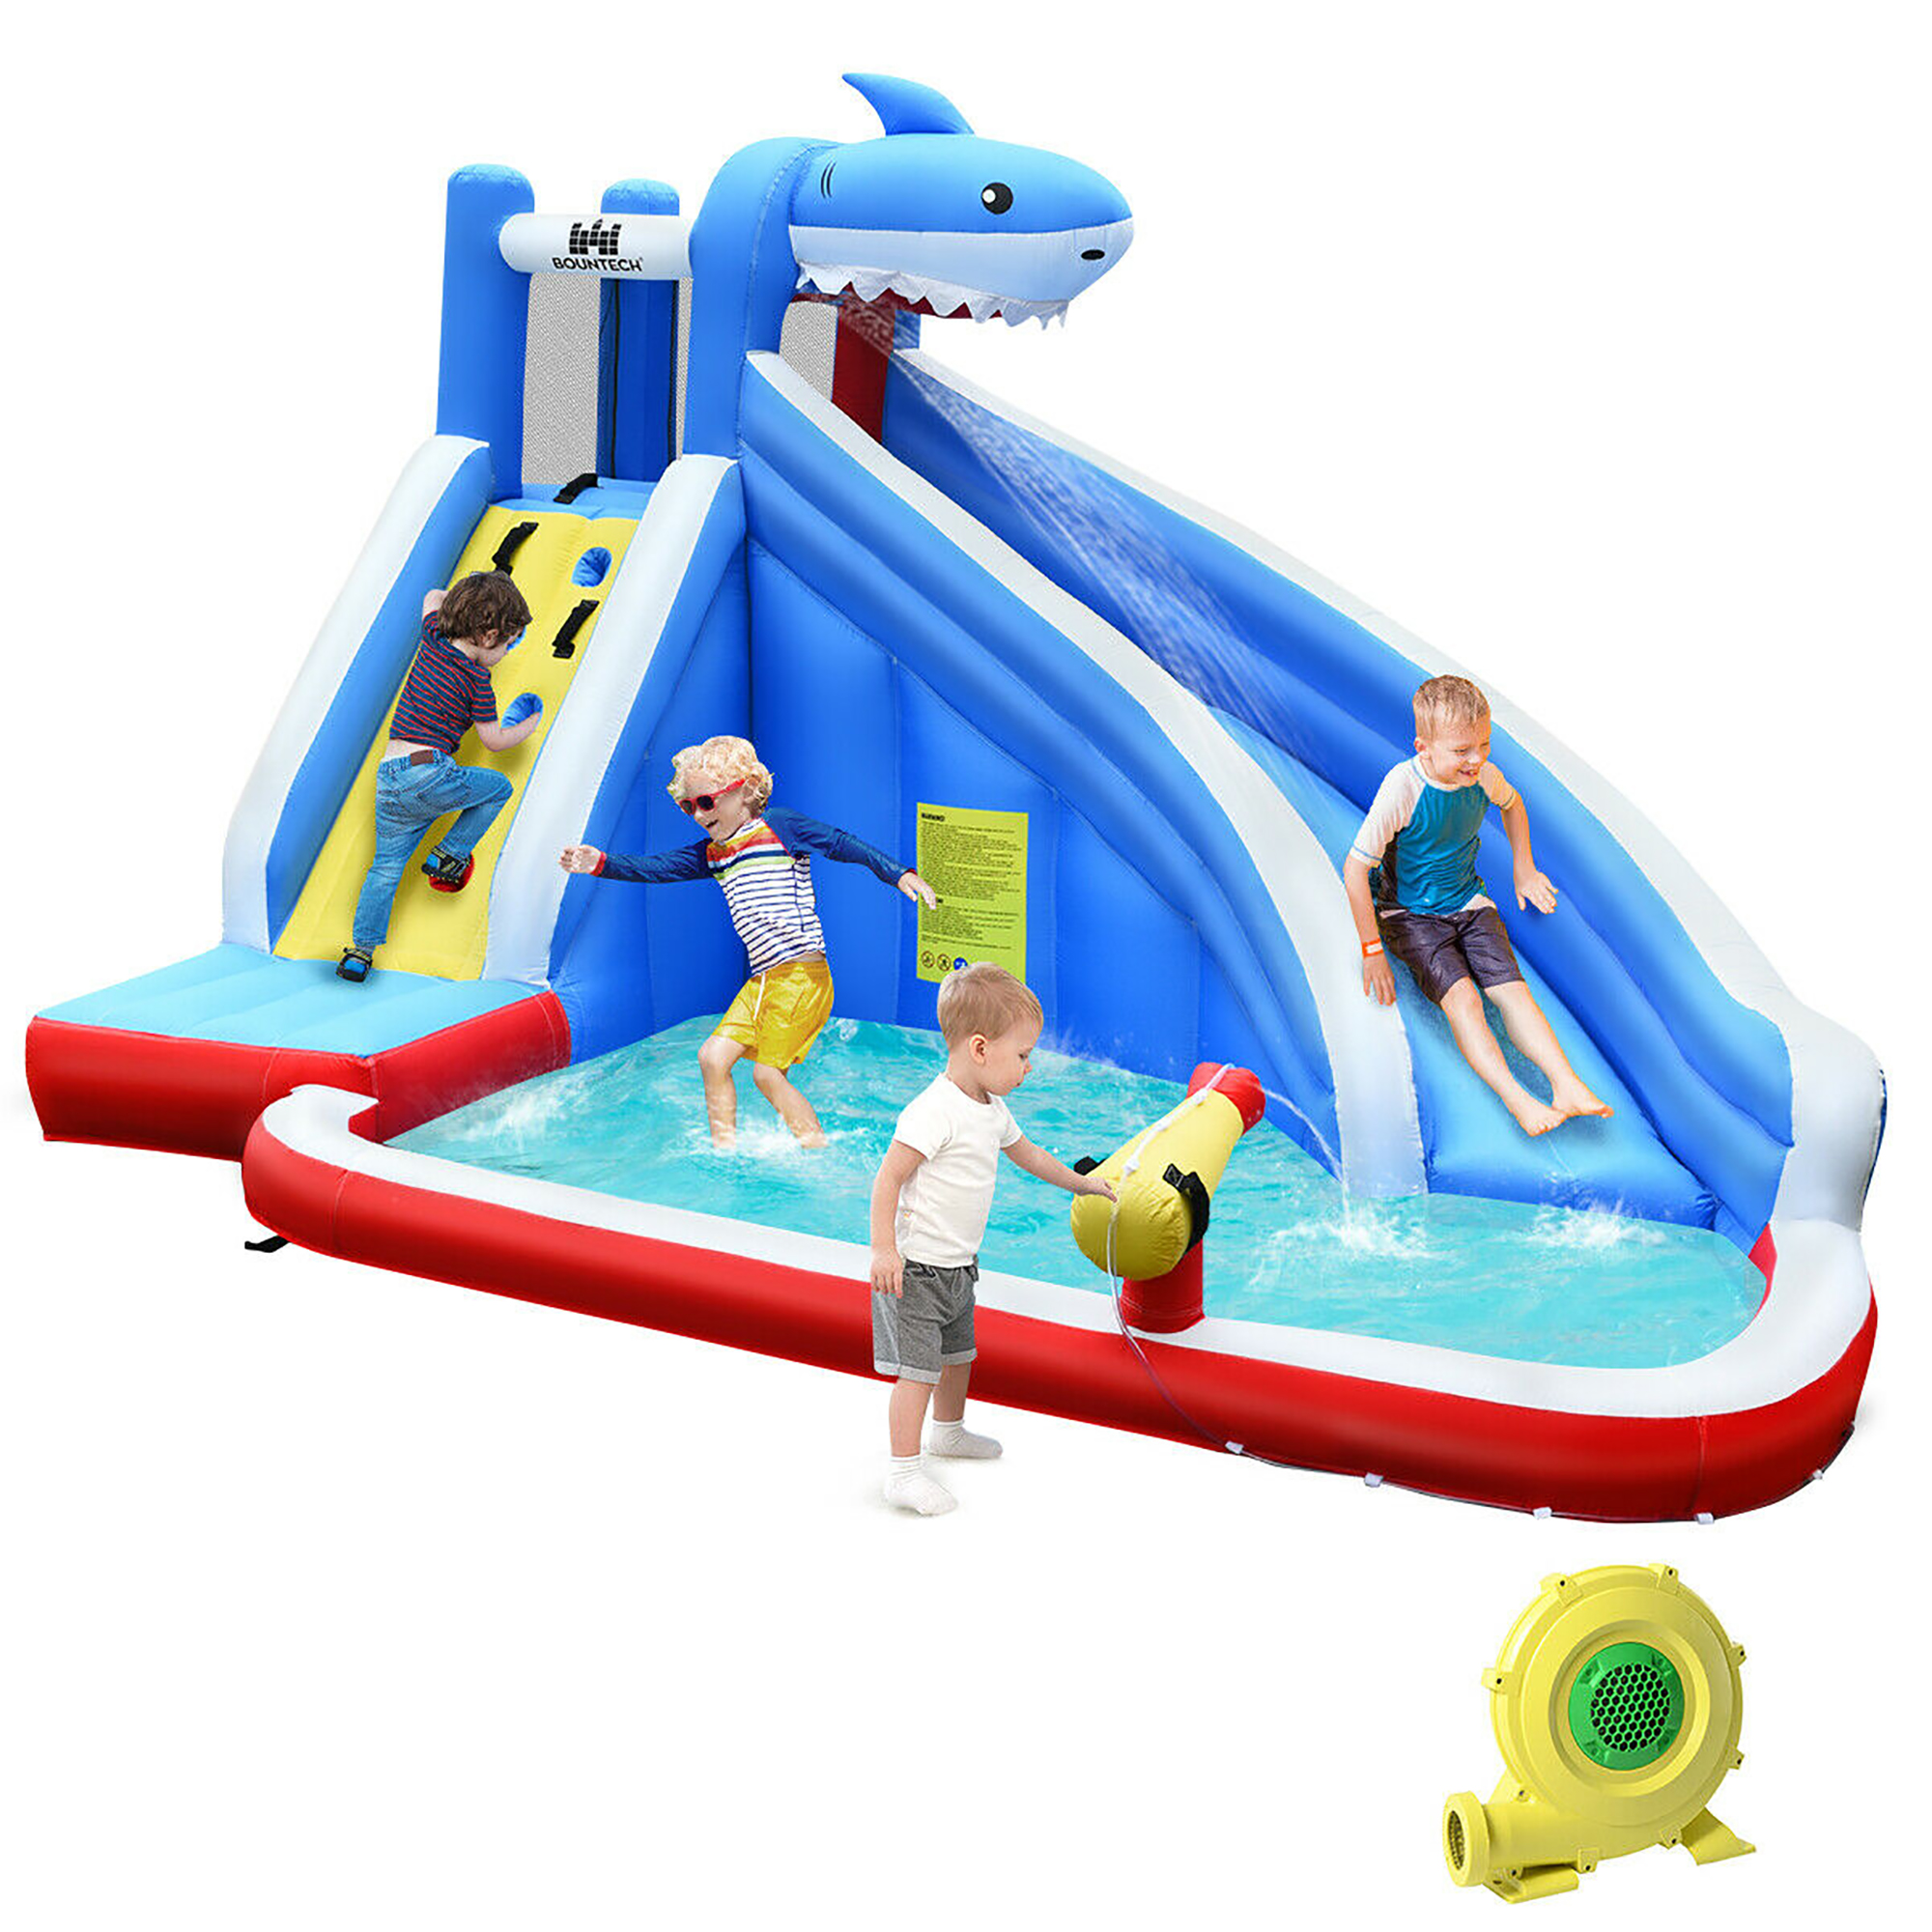 Costway Inflatable Water Slide shark Bounce House Castle Splash Water Pool with 750W Blower